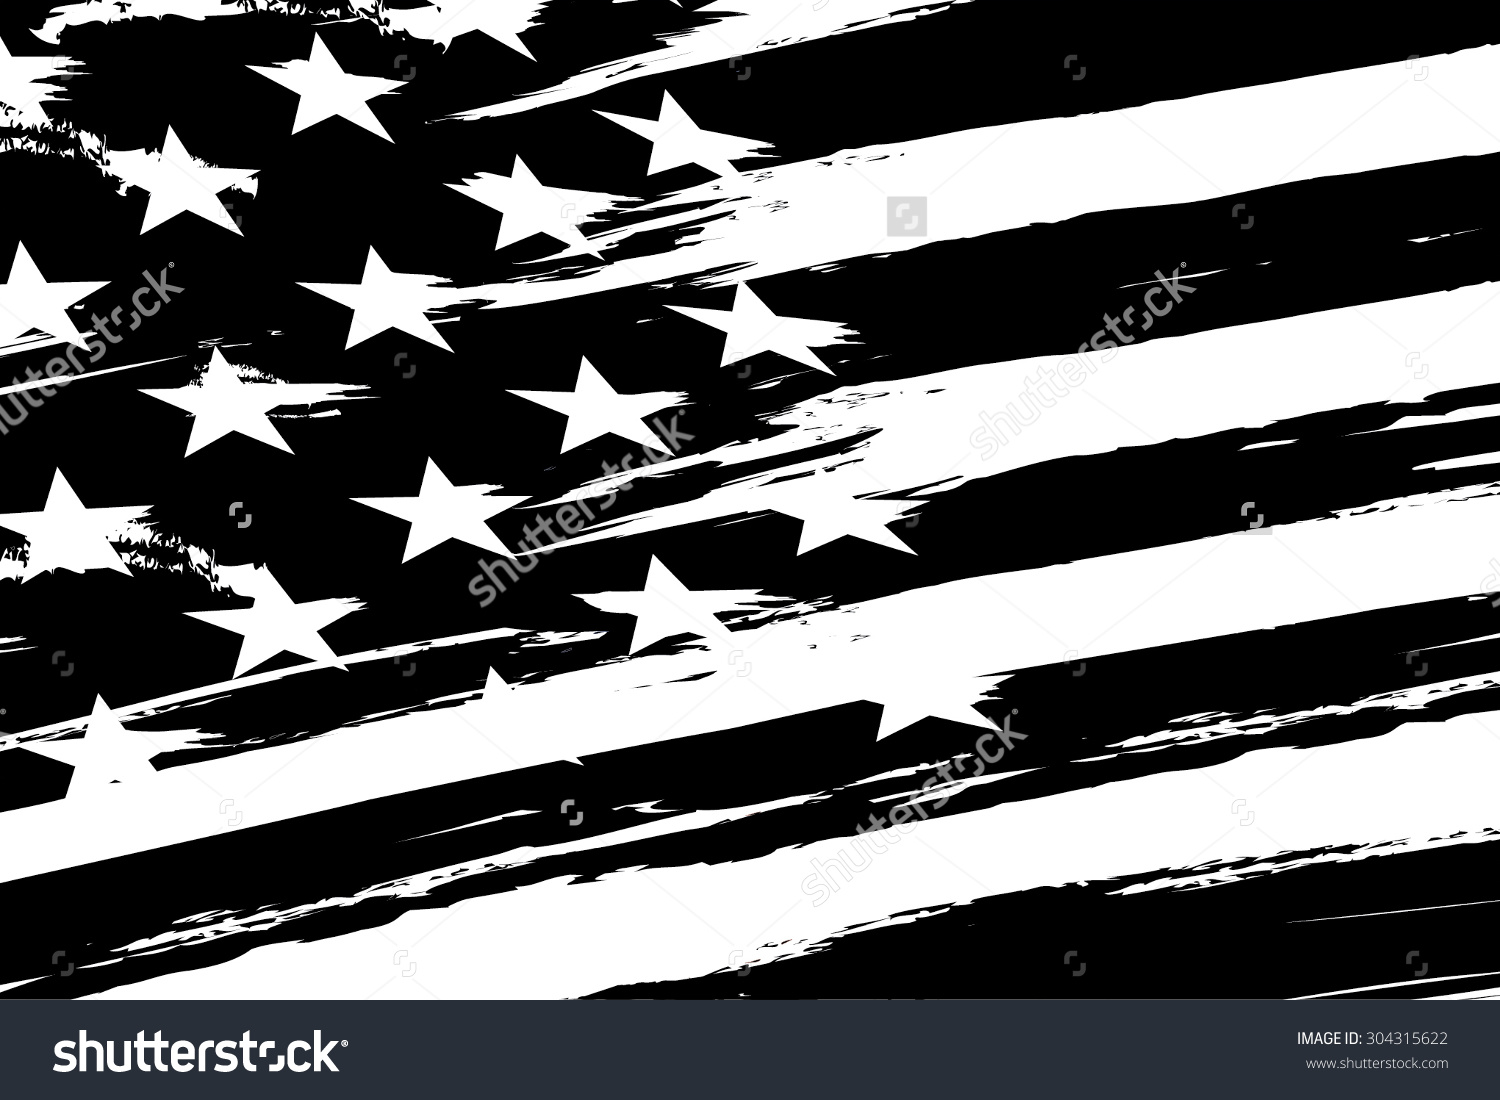 Afro-american flag clipart - Clipground